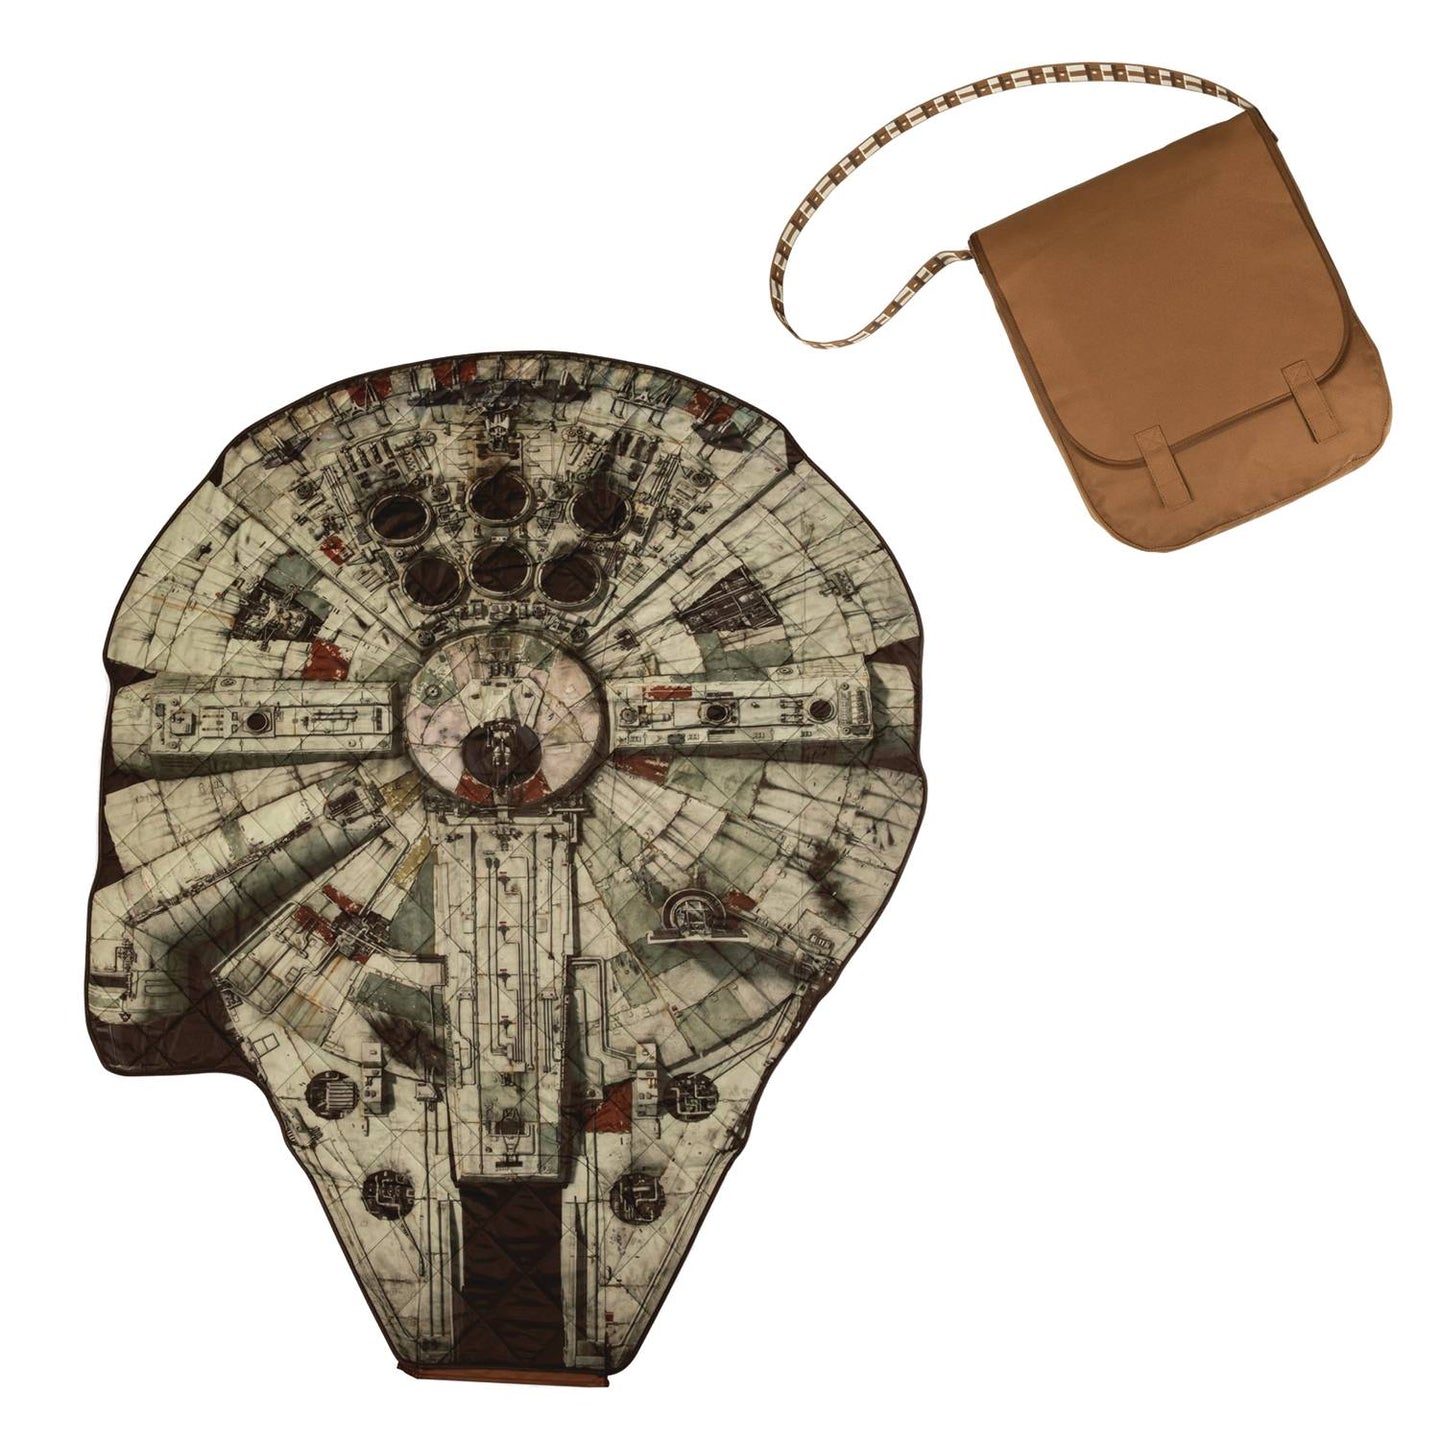 Star Wars Millenium Falcon Blanket In A Bag when Folded 12.8 in X 16.5 in X 2 inch Opens to 59 inch X 51 inch